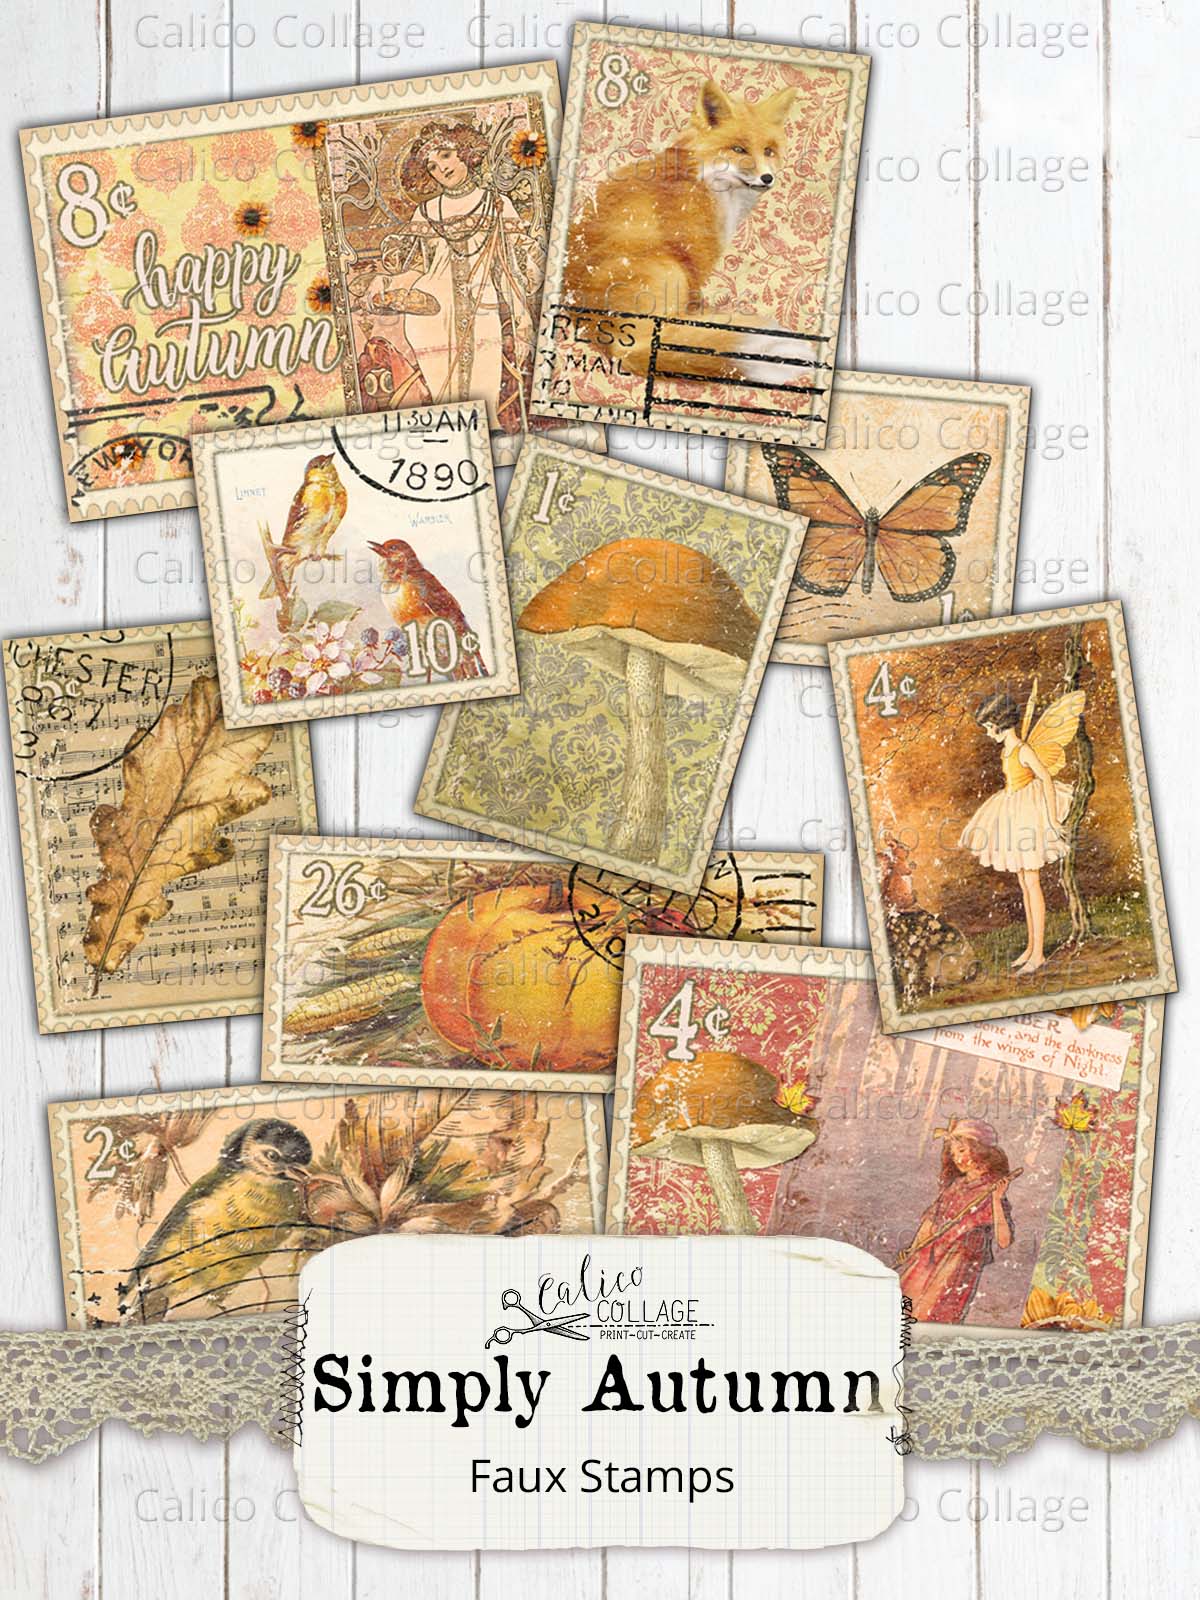 Simply Autumn Faux Stamps, Junk Journal Supplies